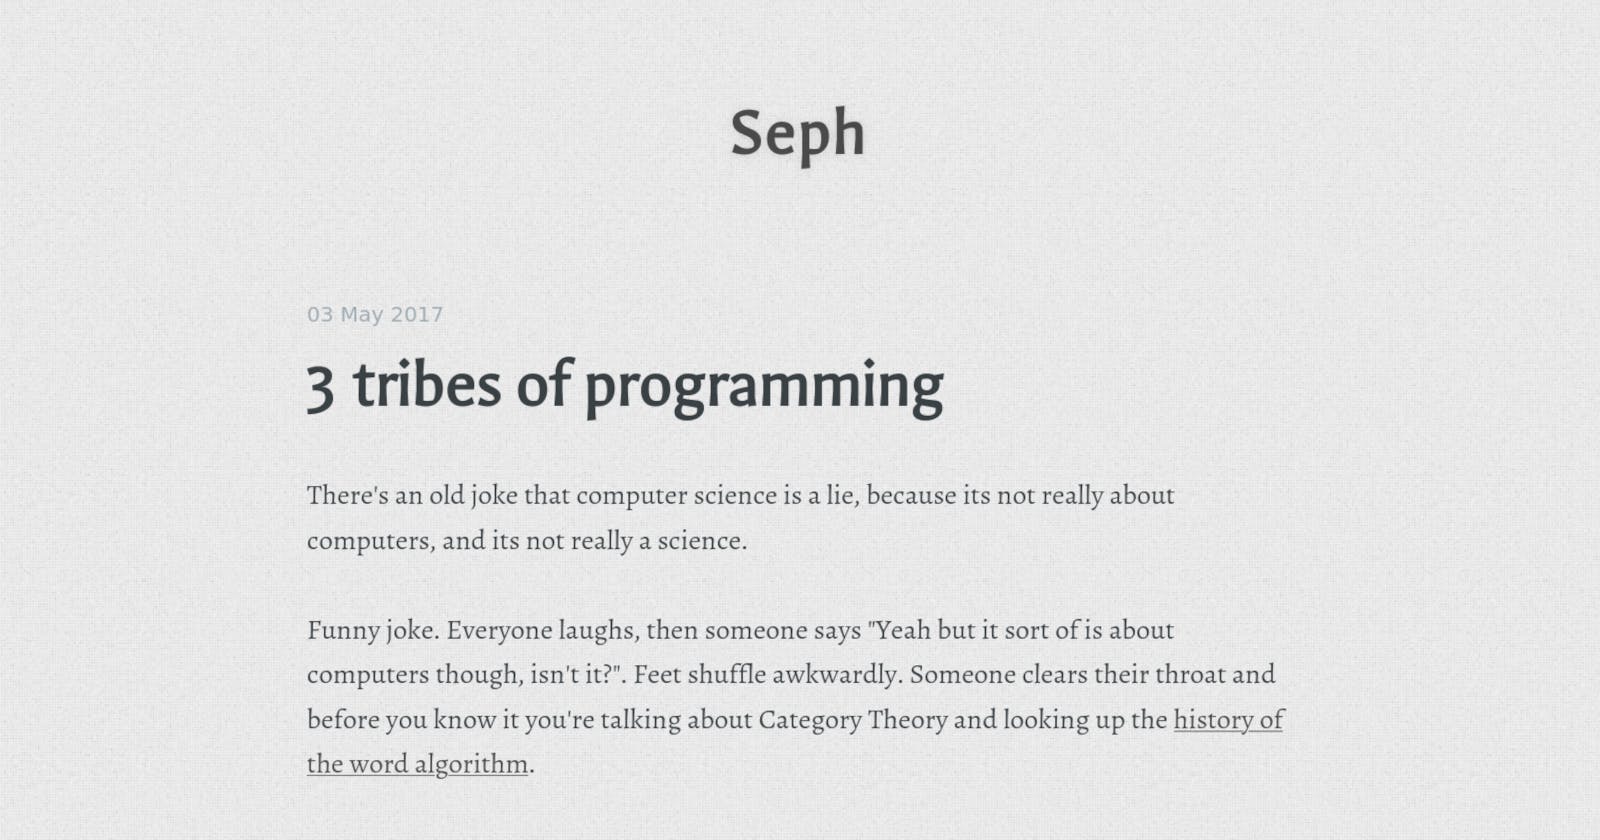 Article: 3 tribes of programming